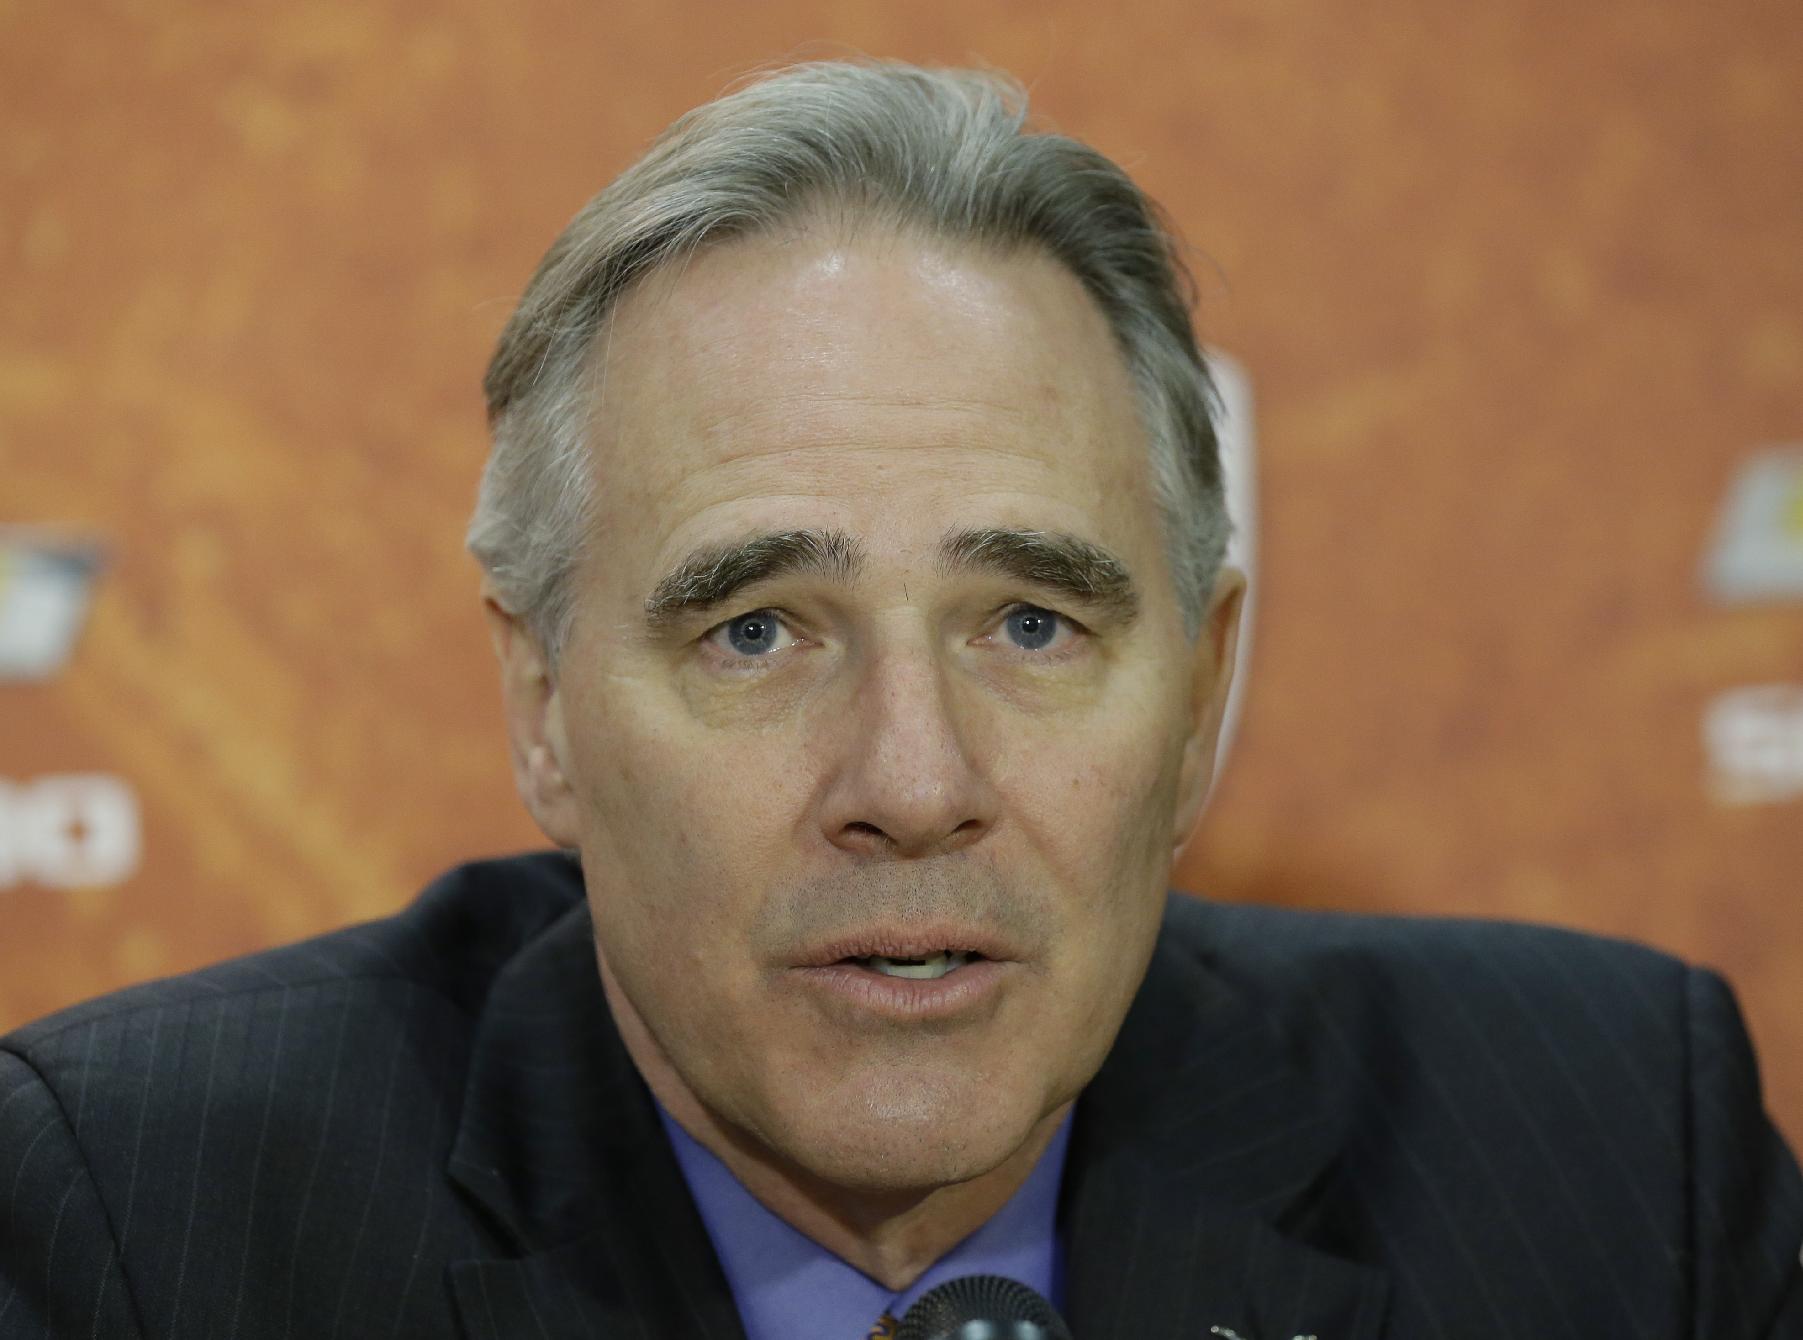 Texas athletic director Steve Patterson during a news conference where Charlie Strong was introduce at the new Texas football coach,Monday,  Jan. 6, 2014, in Austin, Texas. (AP Photo/Eric Gay)